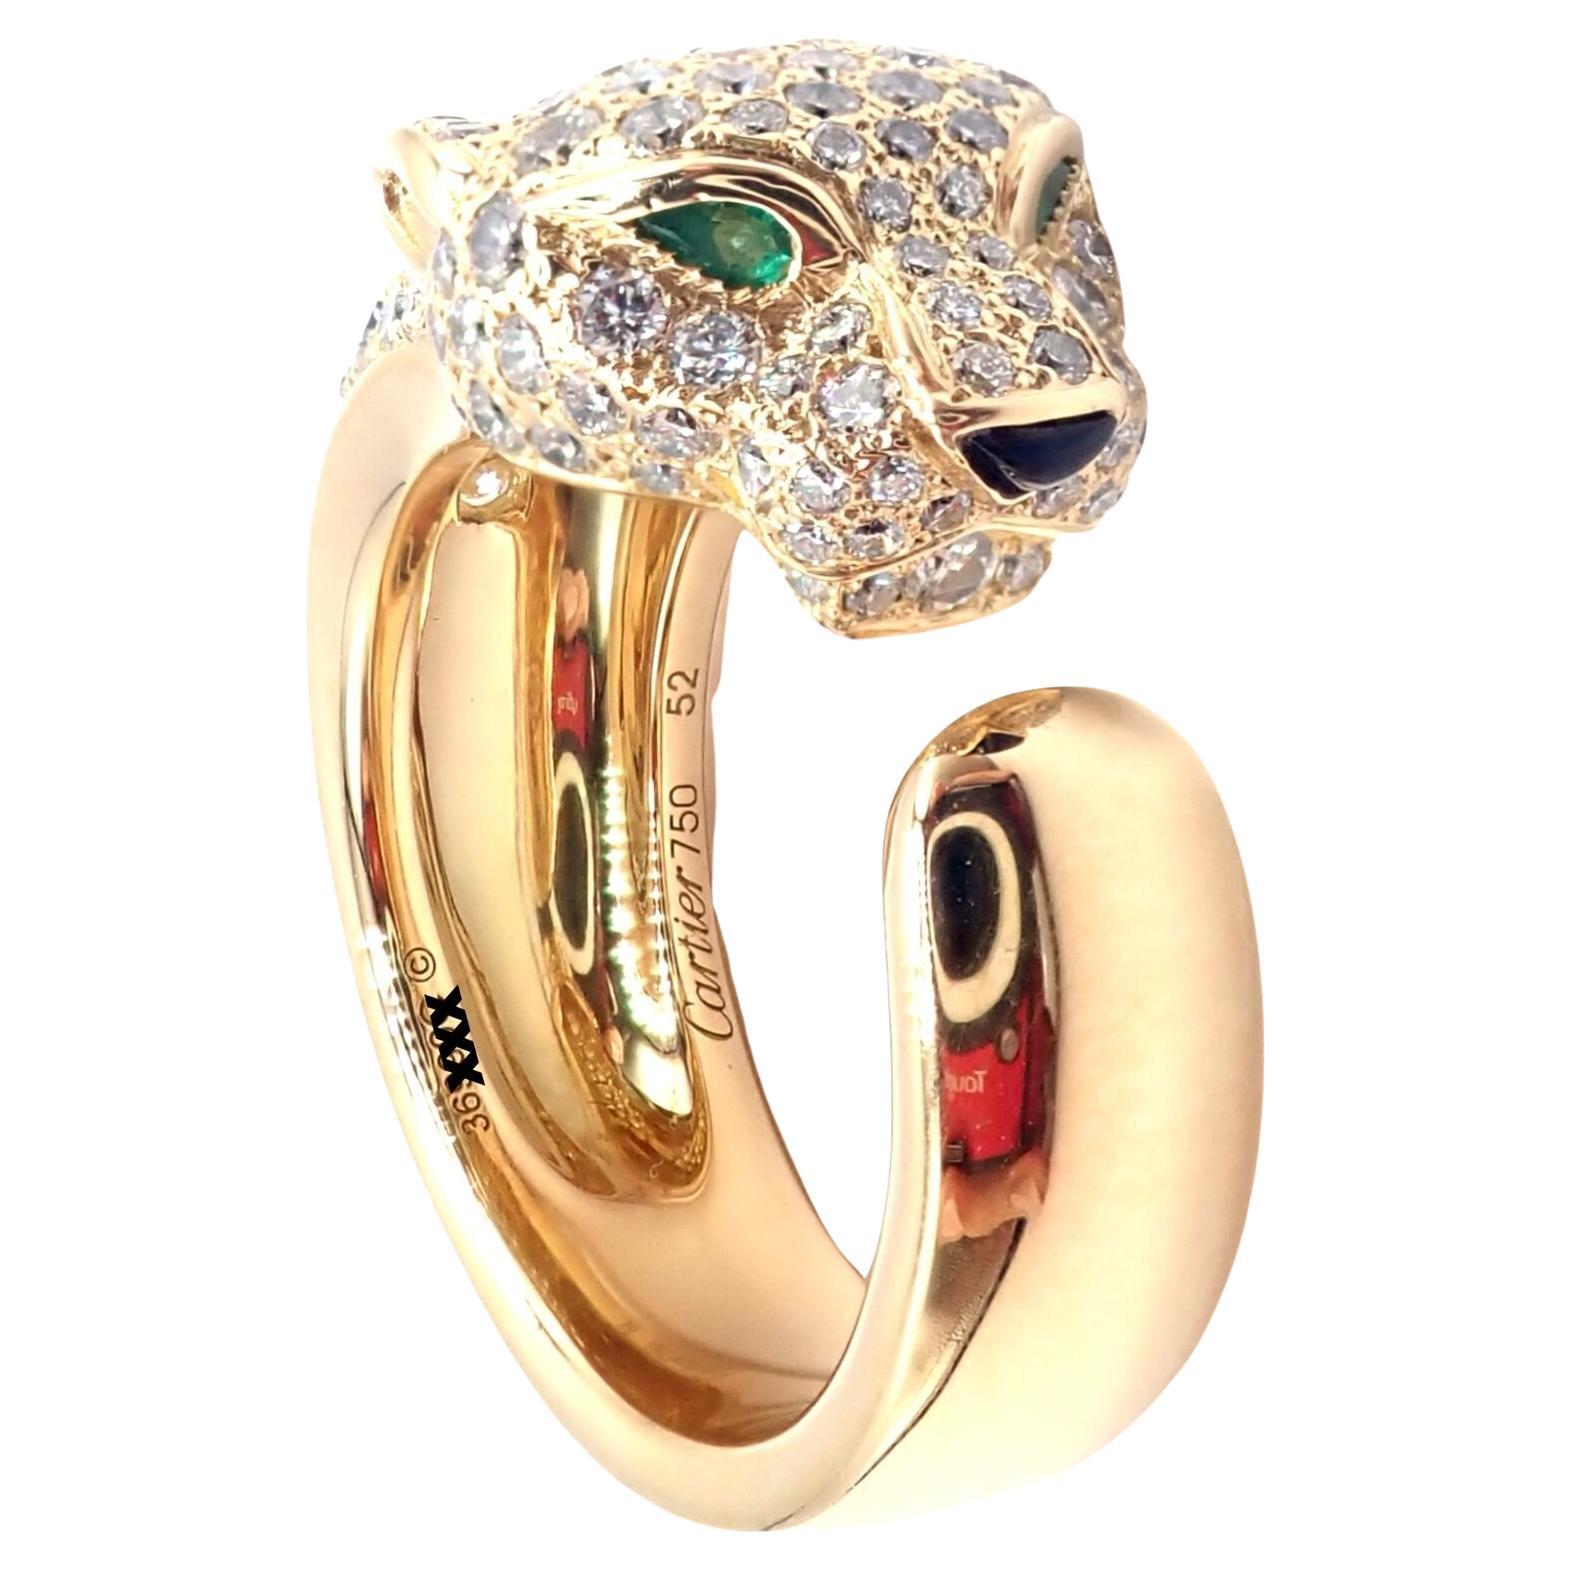 Cartier Goldring, Panther Panthere Smaragd Onyx Diamant im Angebot